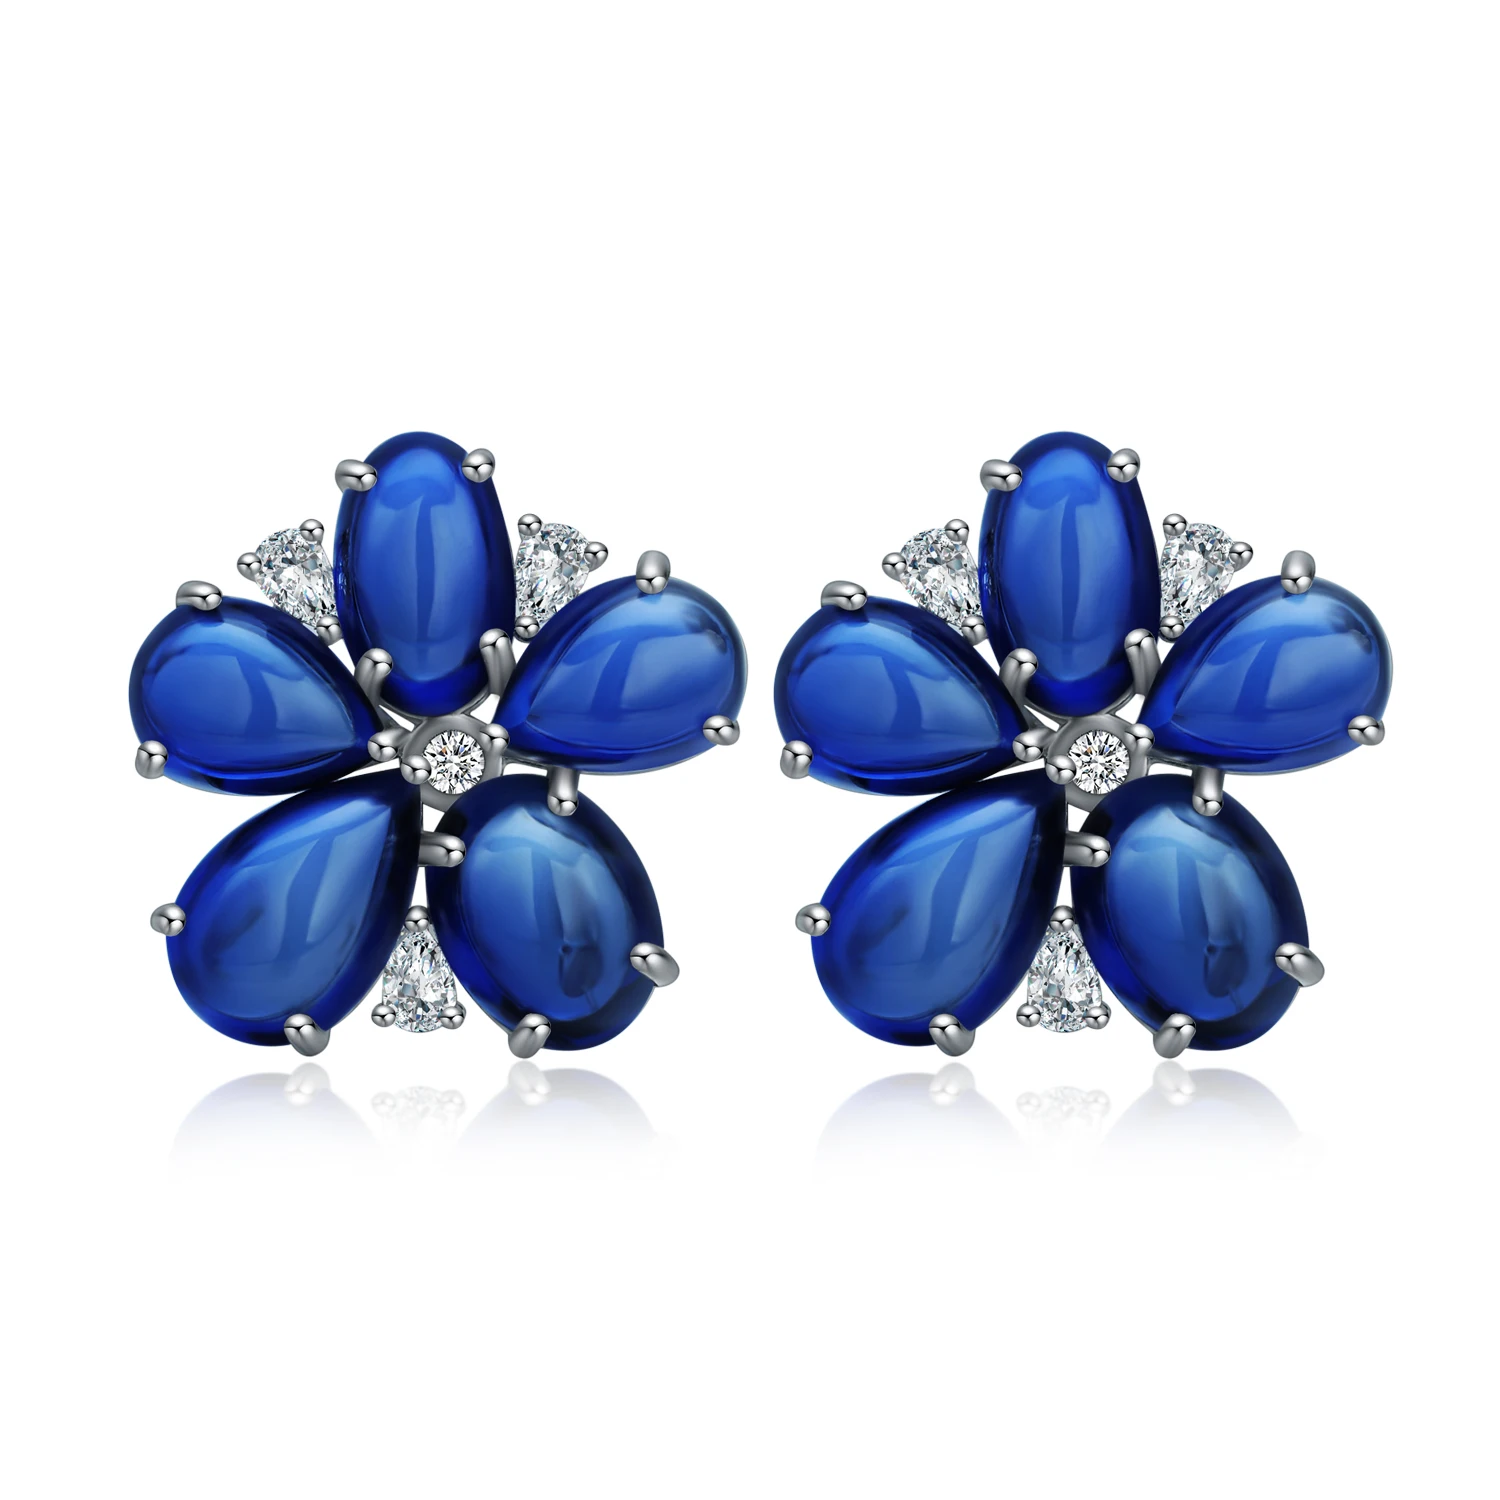 

Zhanhao 14.23ct S925 Sterling Silver Blue Corundum Plain Stud Earrings Stones Jewelry For Women Wholesale Price